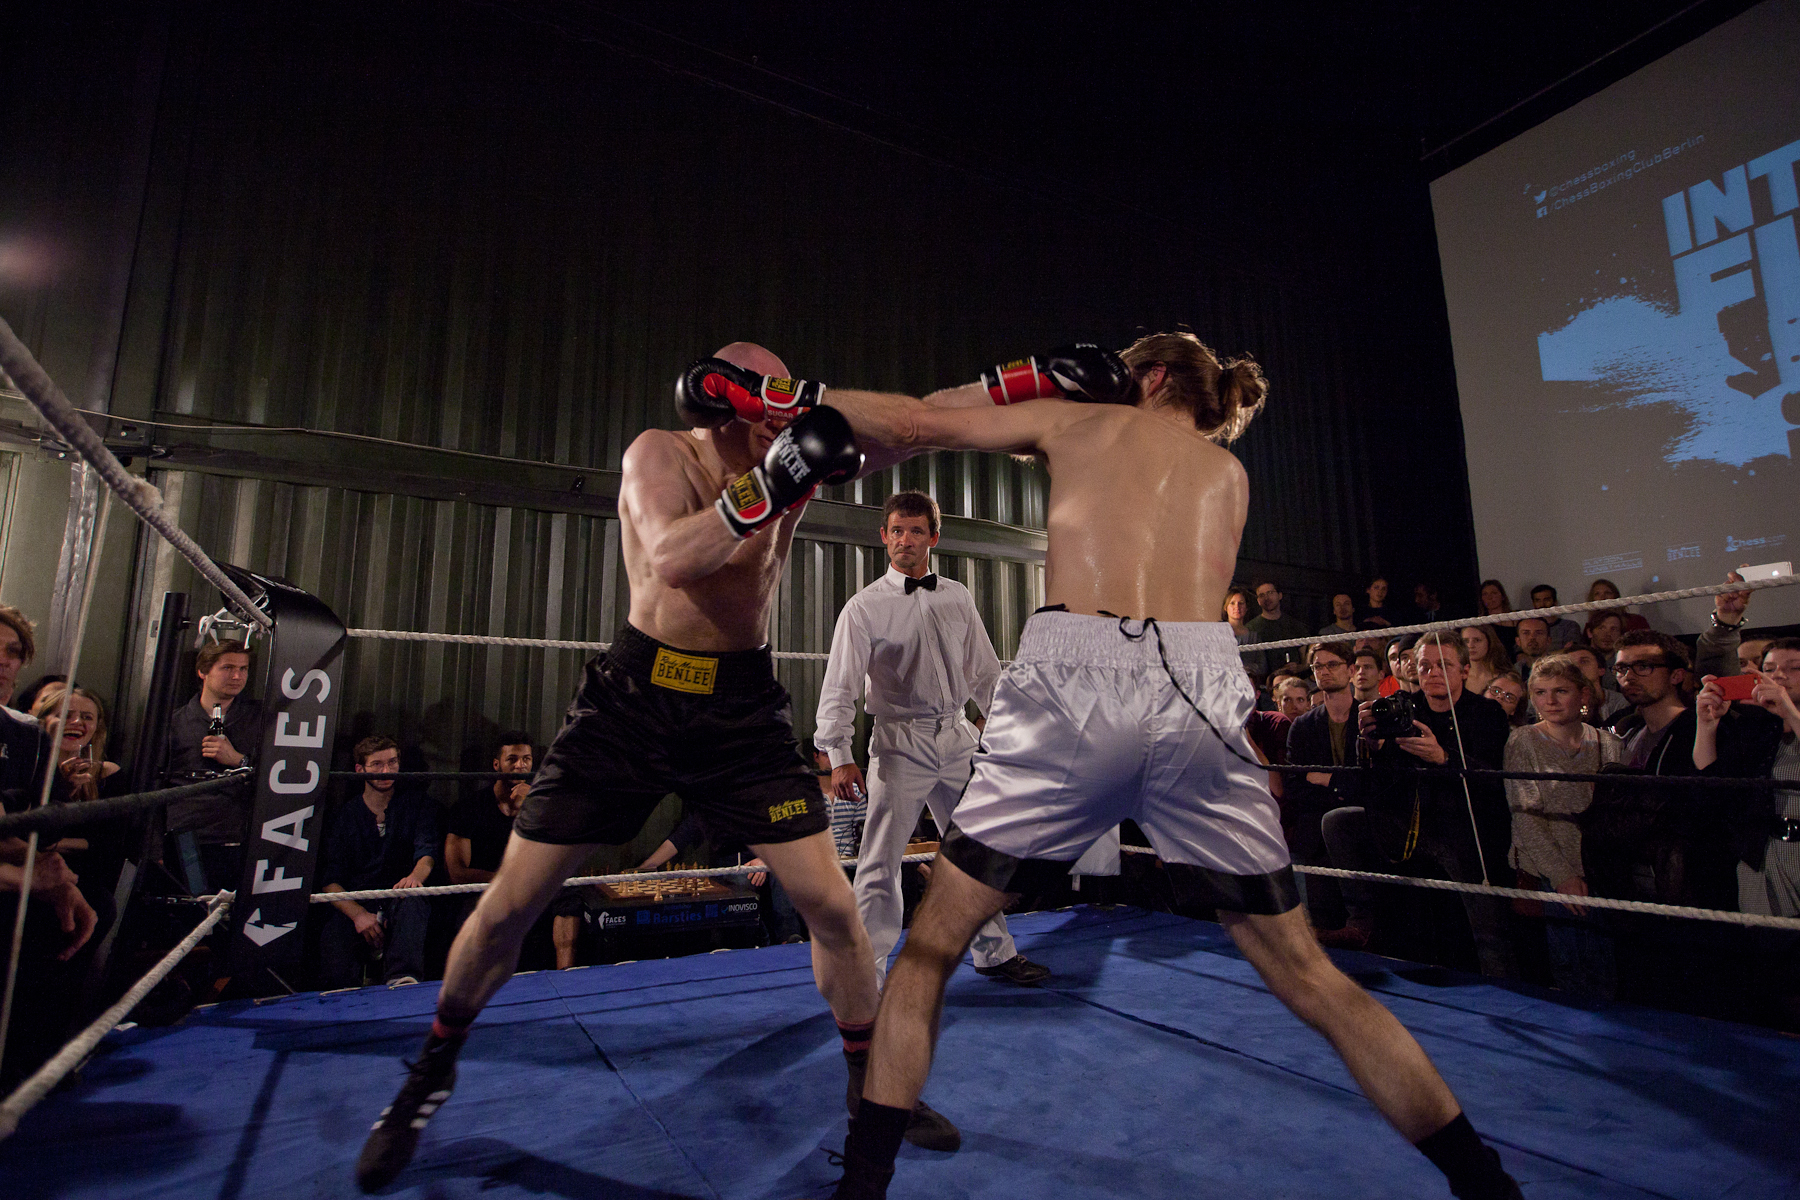 By Pawn or by Brawn: Inside the Chessboxing Movement